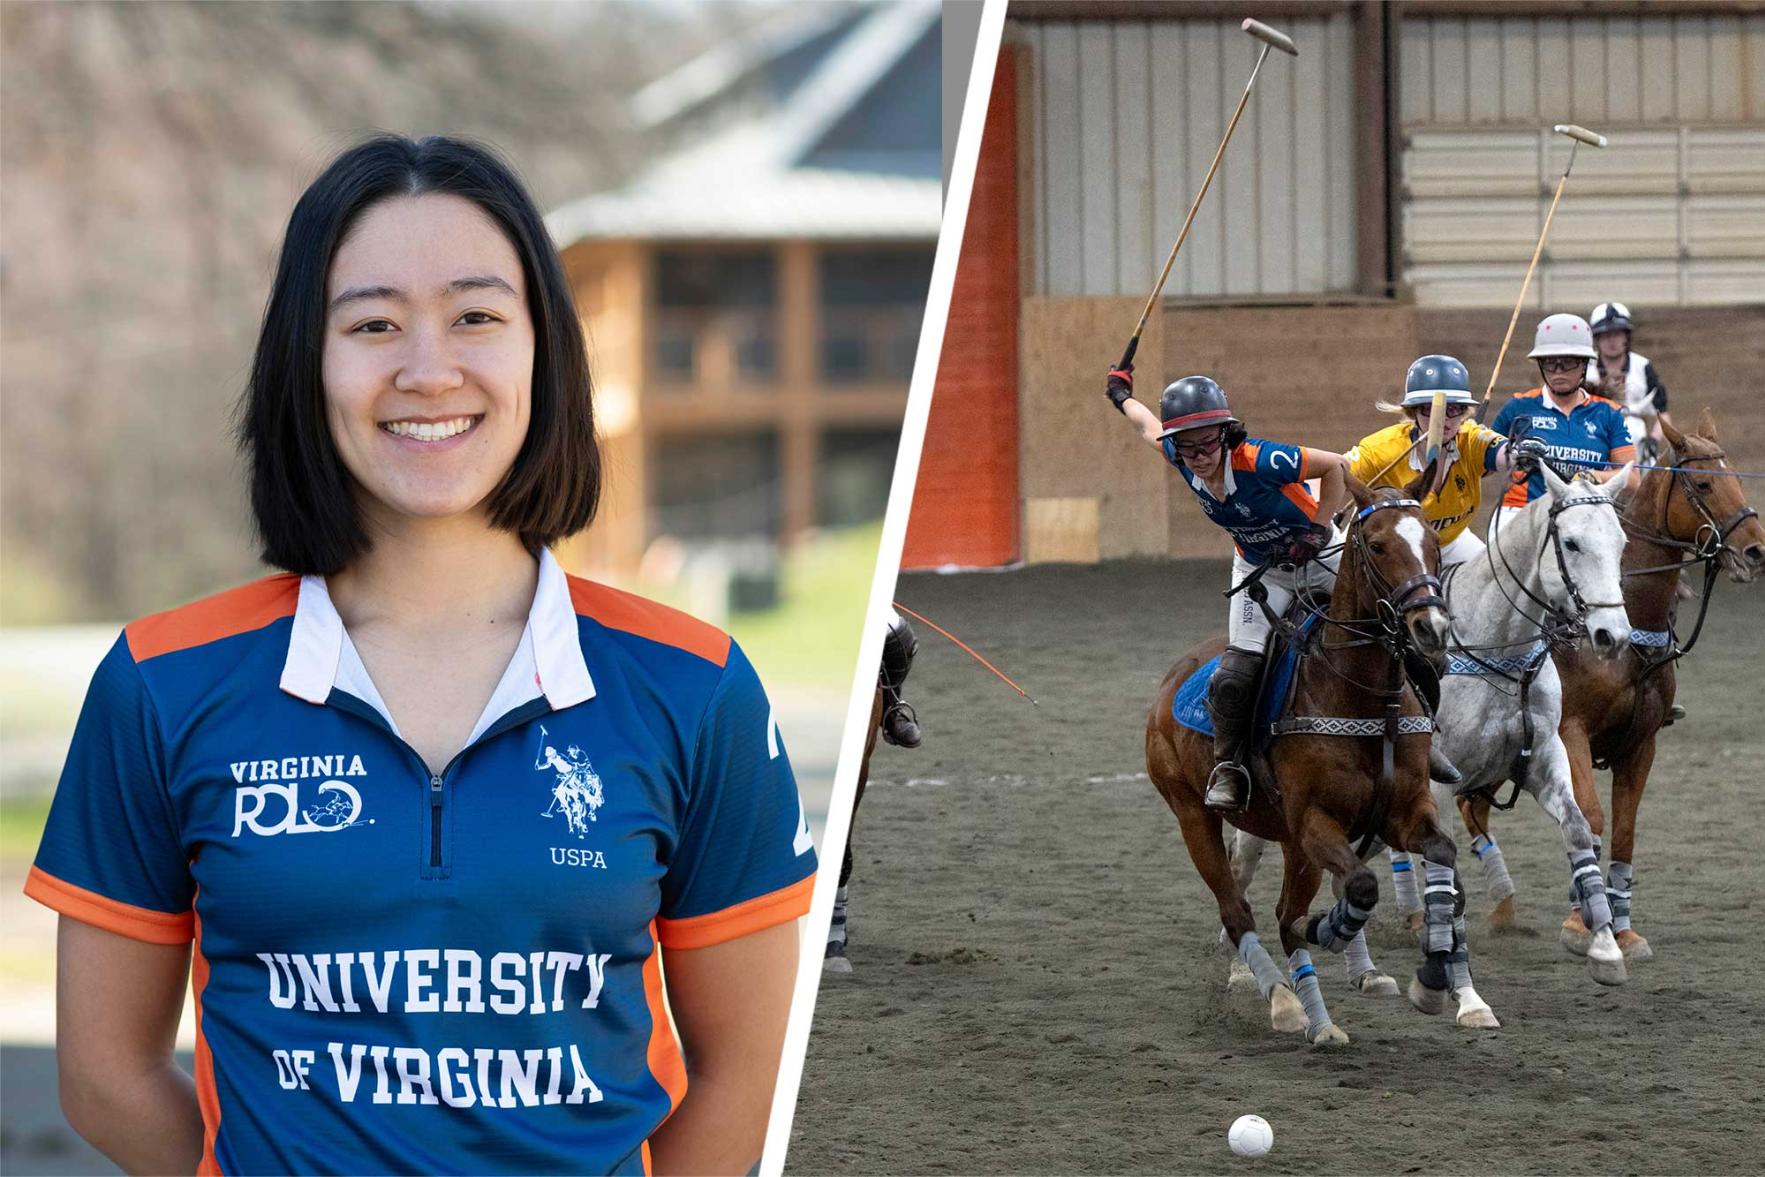 Left, a portrait of Lea Jih-Vieira, Right, Lea on horseback about to hit a polo ball